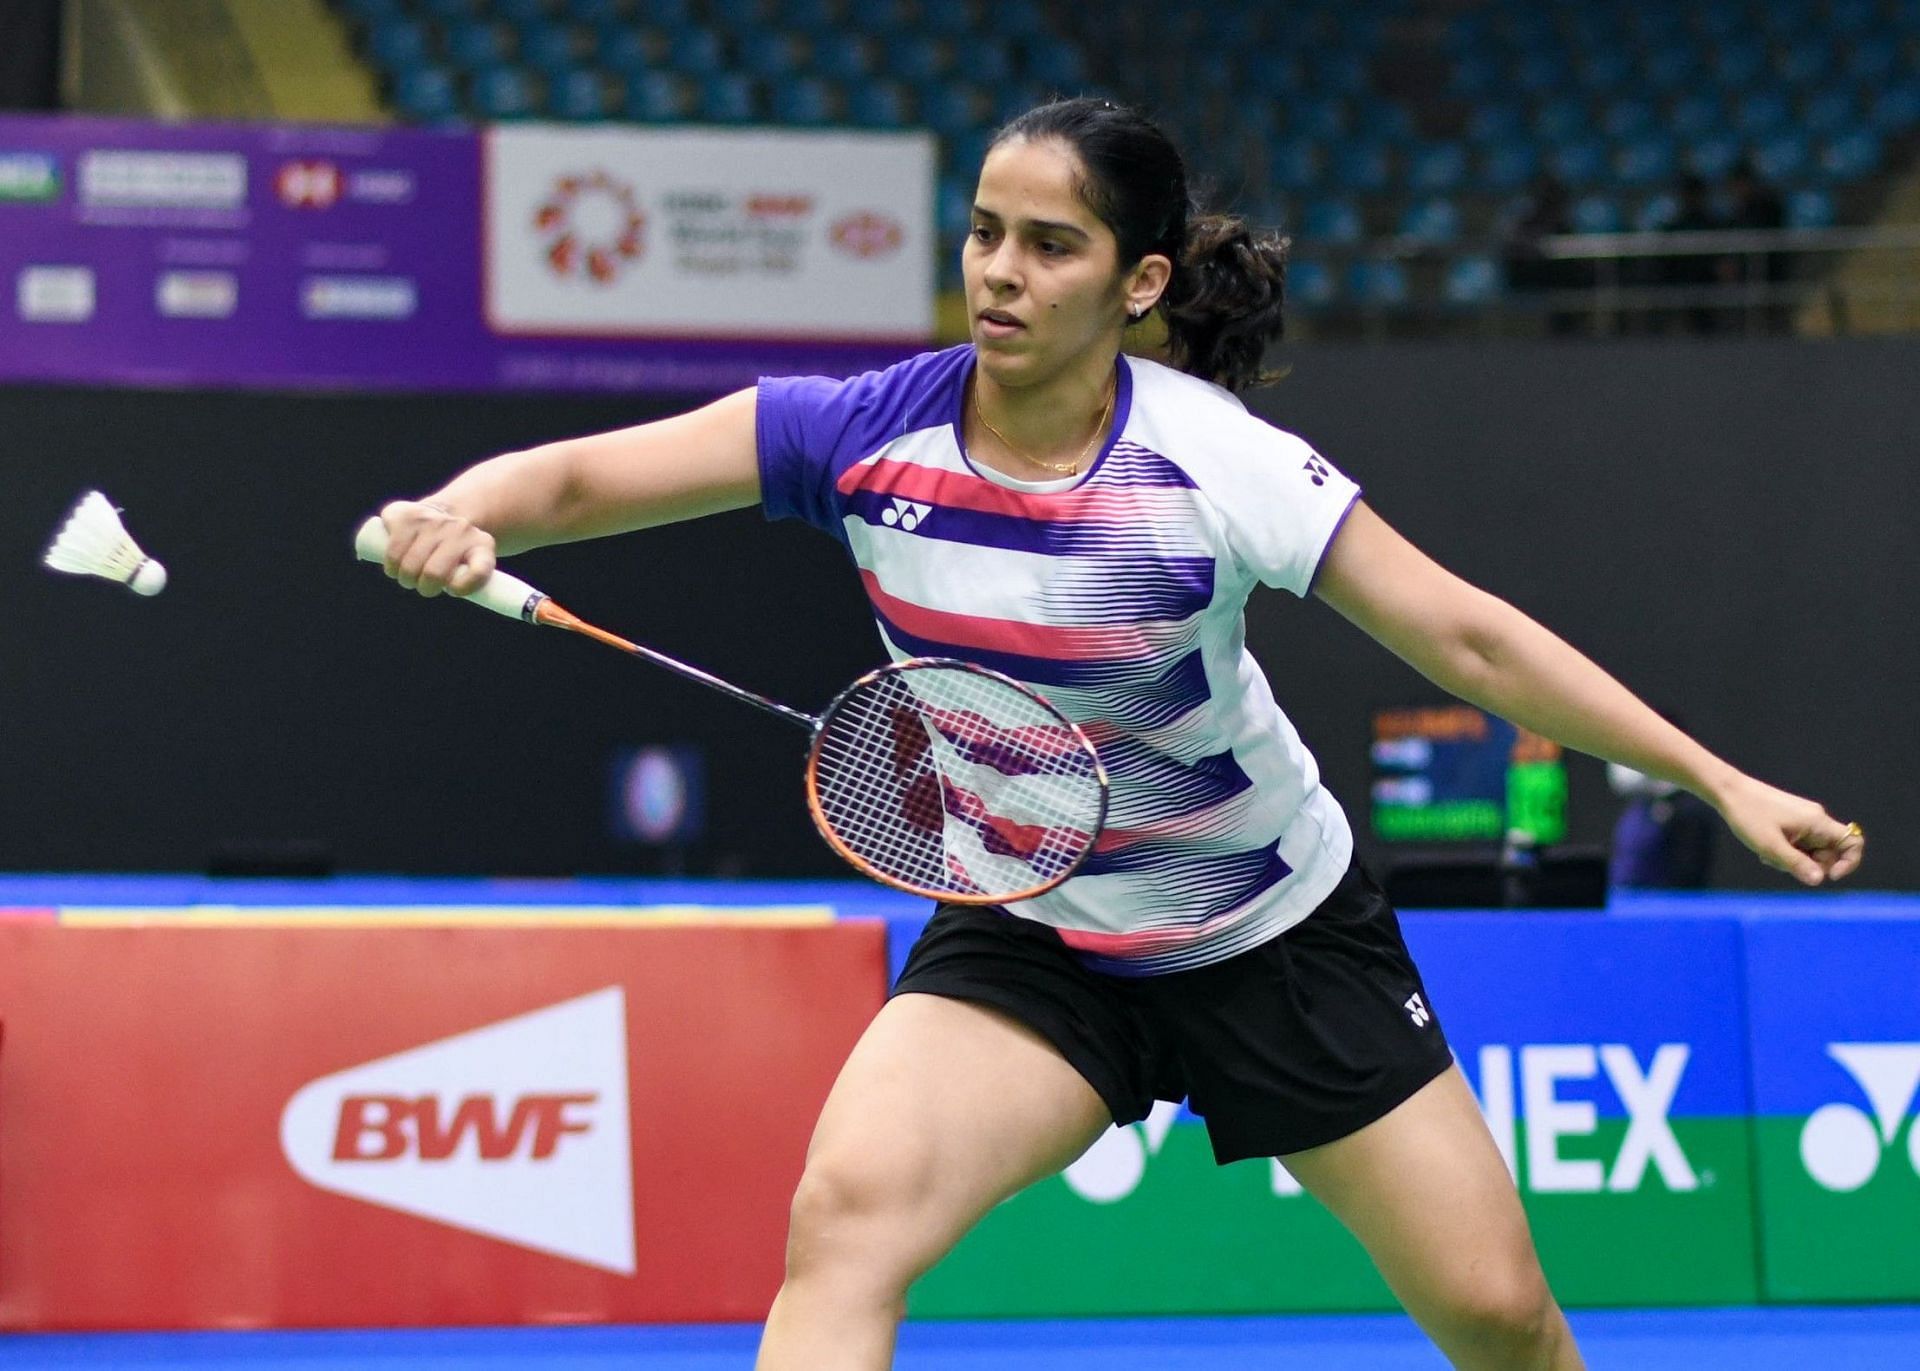 Pune likely to host this year’s Senior National Badminton Championship